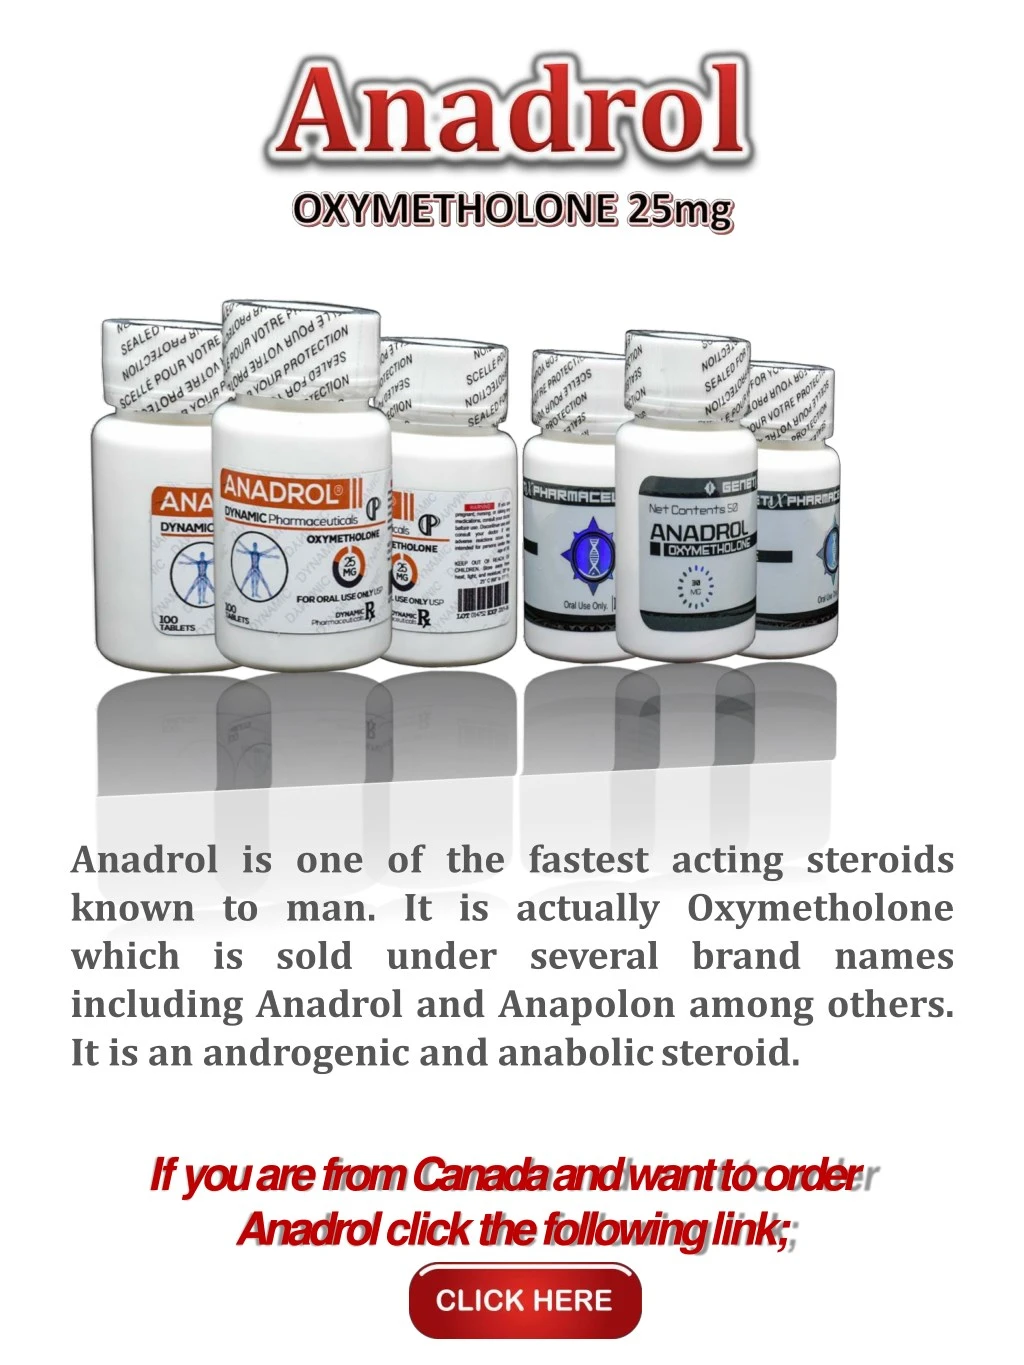 anadrol is one of the fastest acting steroids